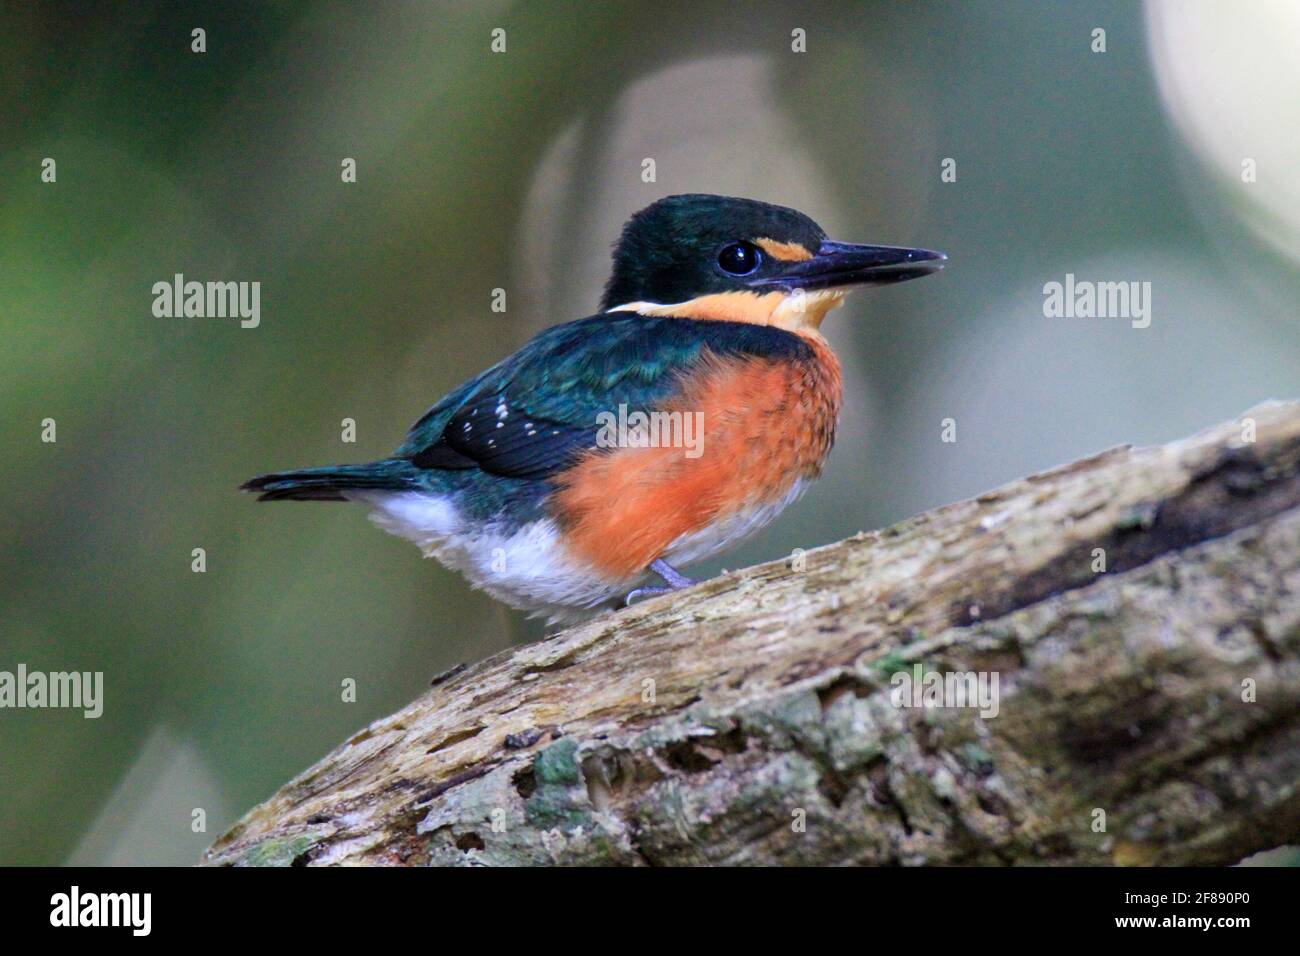 Colorful Pygmy kingfisher on a branch in Costa Rica Stock Photo